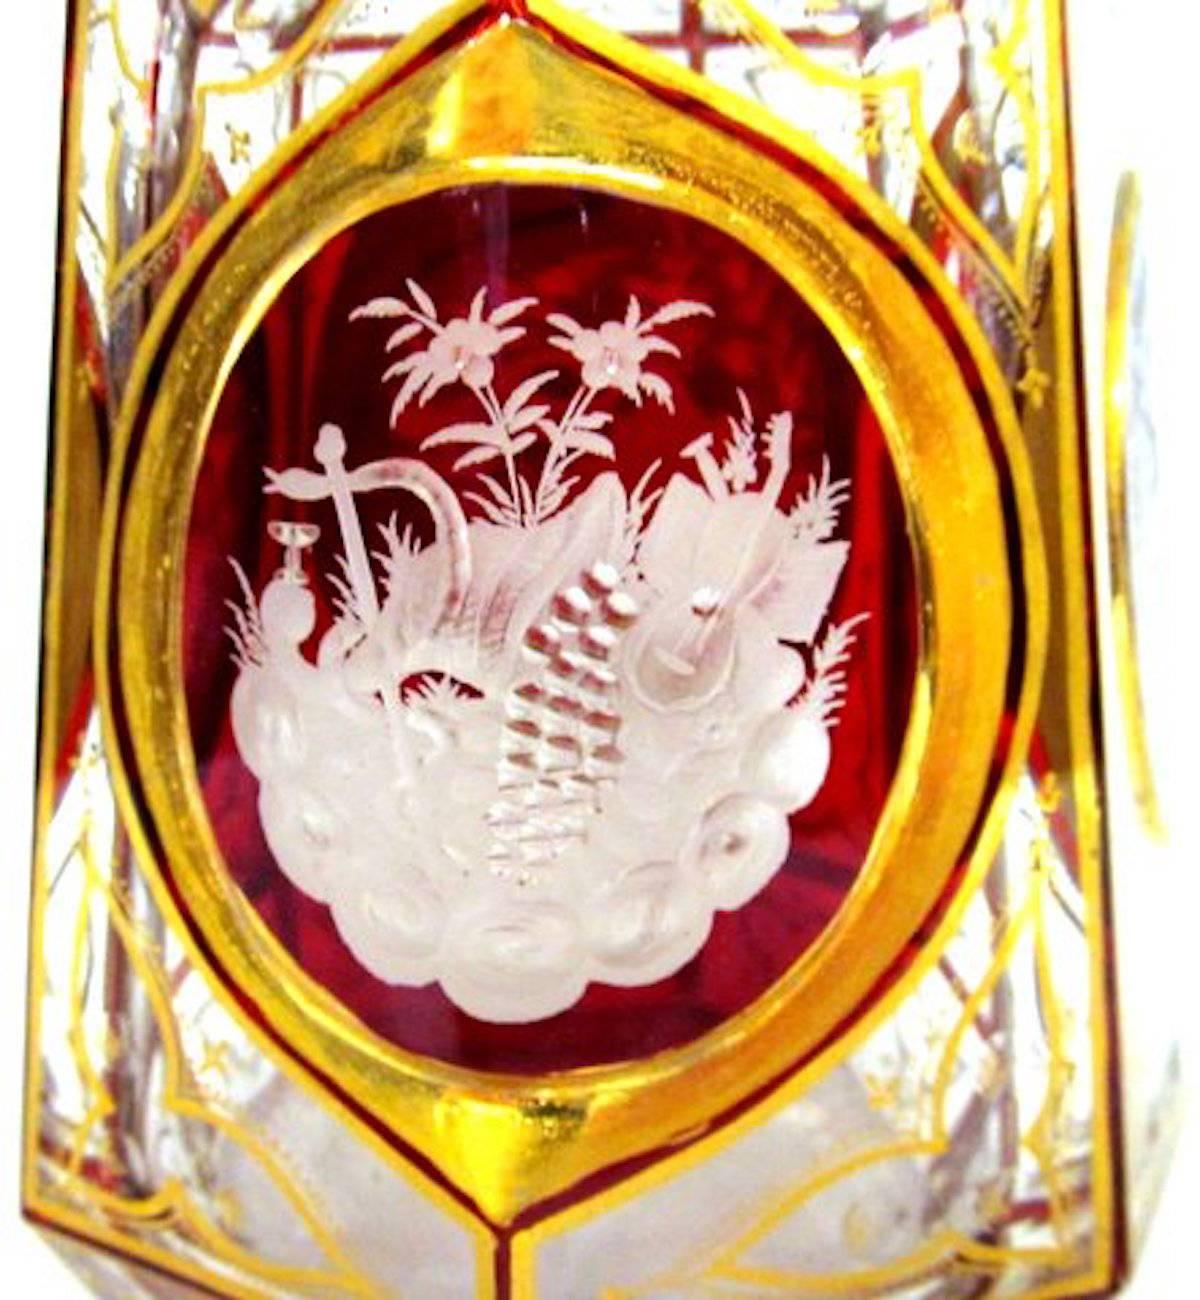 Czech Old 'Moser' Hand-Cut and Engraved Ruby Overlay Ecclesiastical Decanter